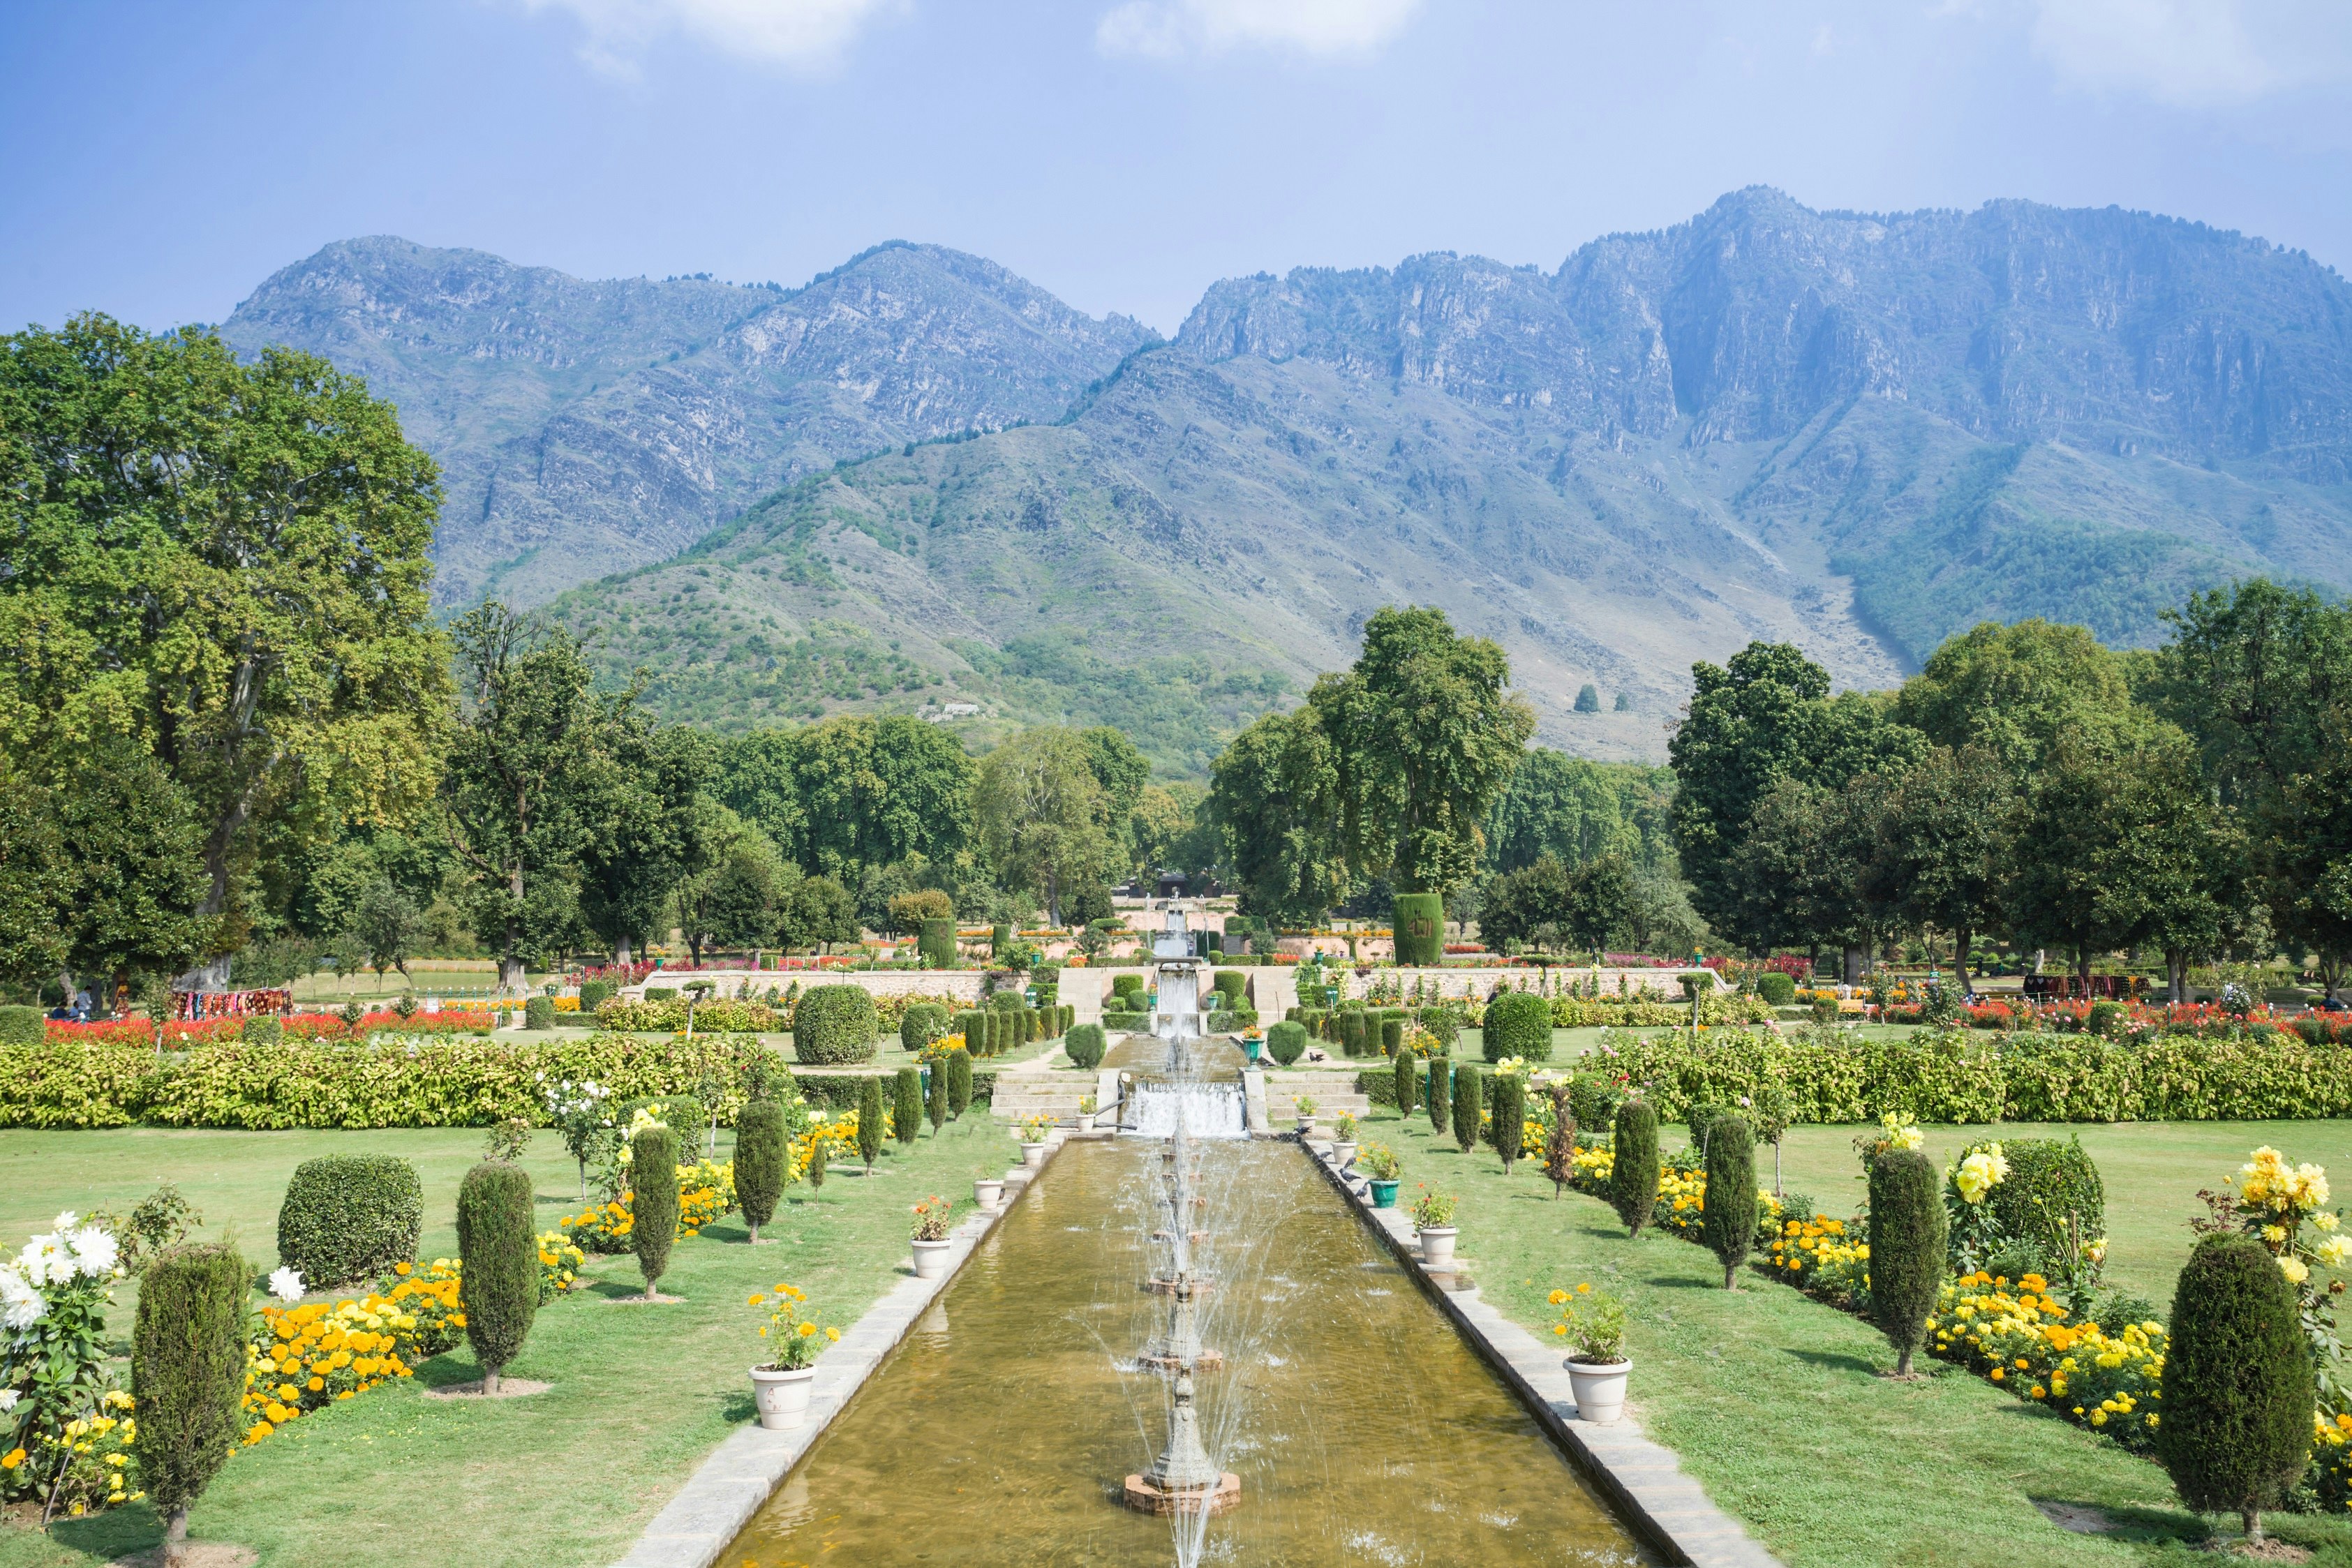 A view of the tiered central pond that runs down the centre of the long Nishat Bagh garden in Srinagar. The pond, which is filled with small fountains, is surrounded by flowers and bushes.